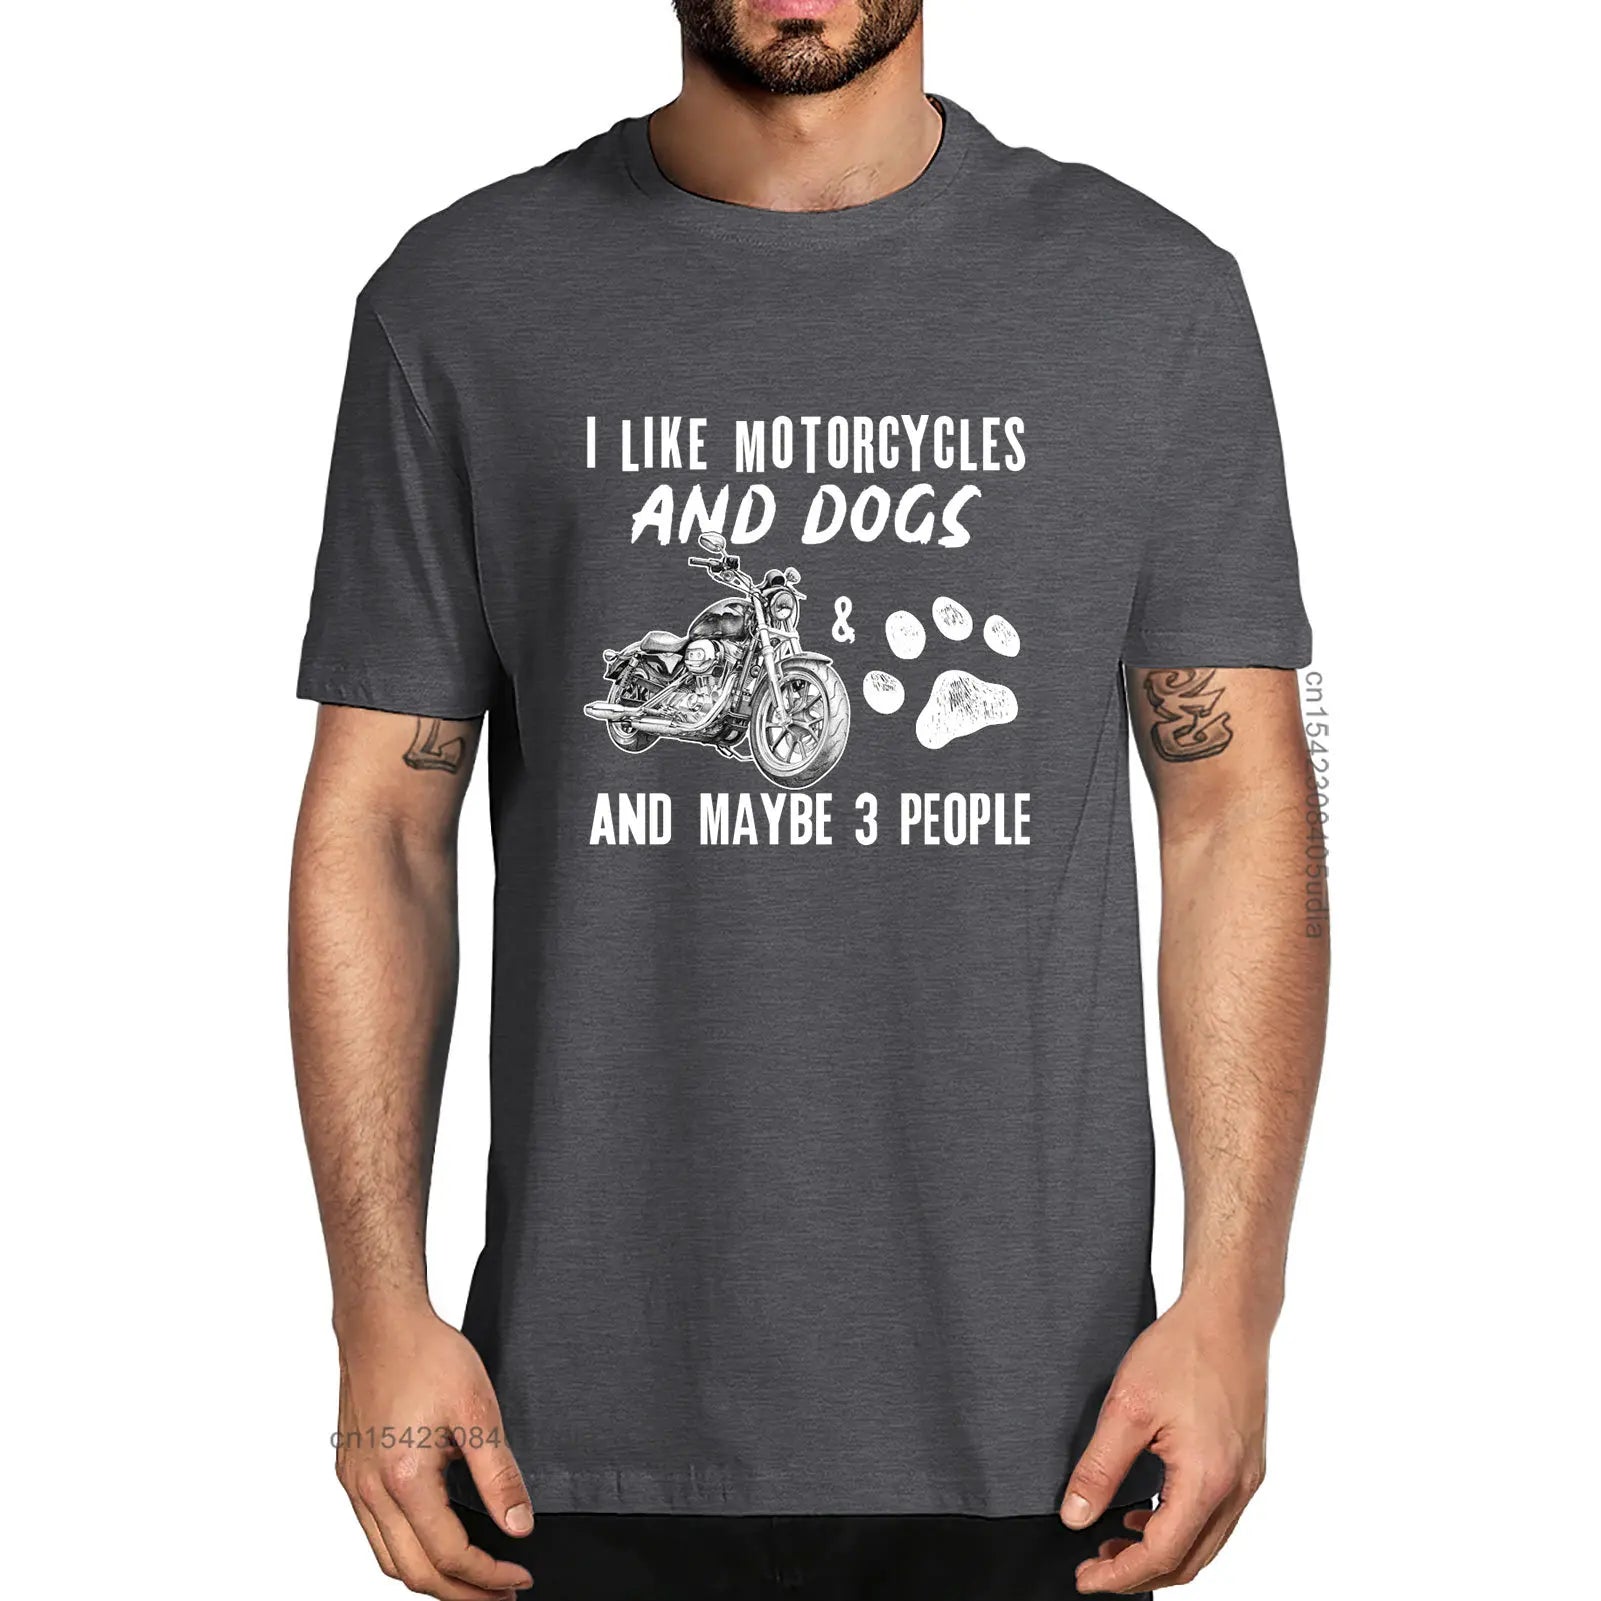 I Like Motorcycles And Dogs And Maybe 3 People Summer Men's 100% Cotton T-Shirts Funny Women Unisex Soft Top Tee - Lizard Vigilante